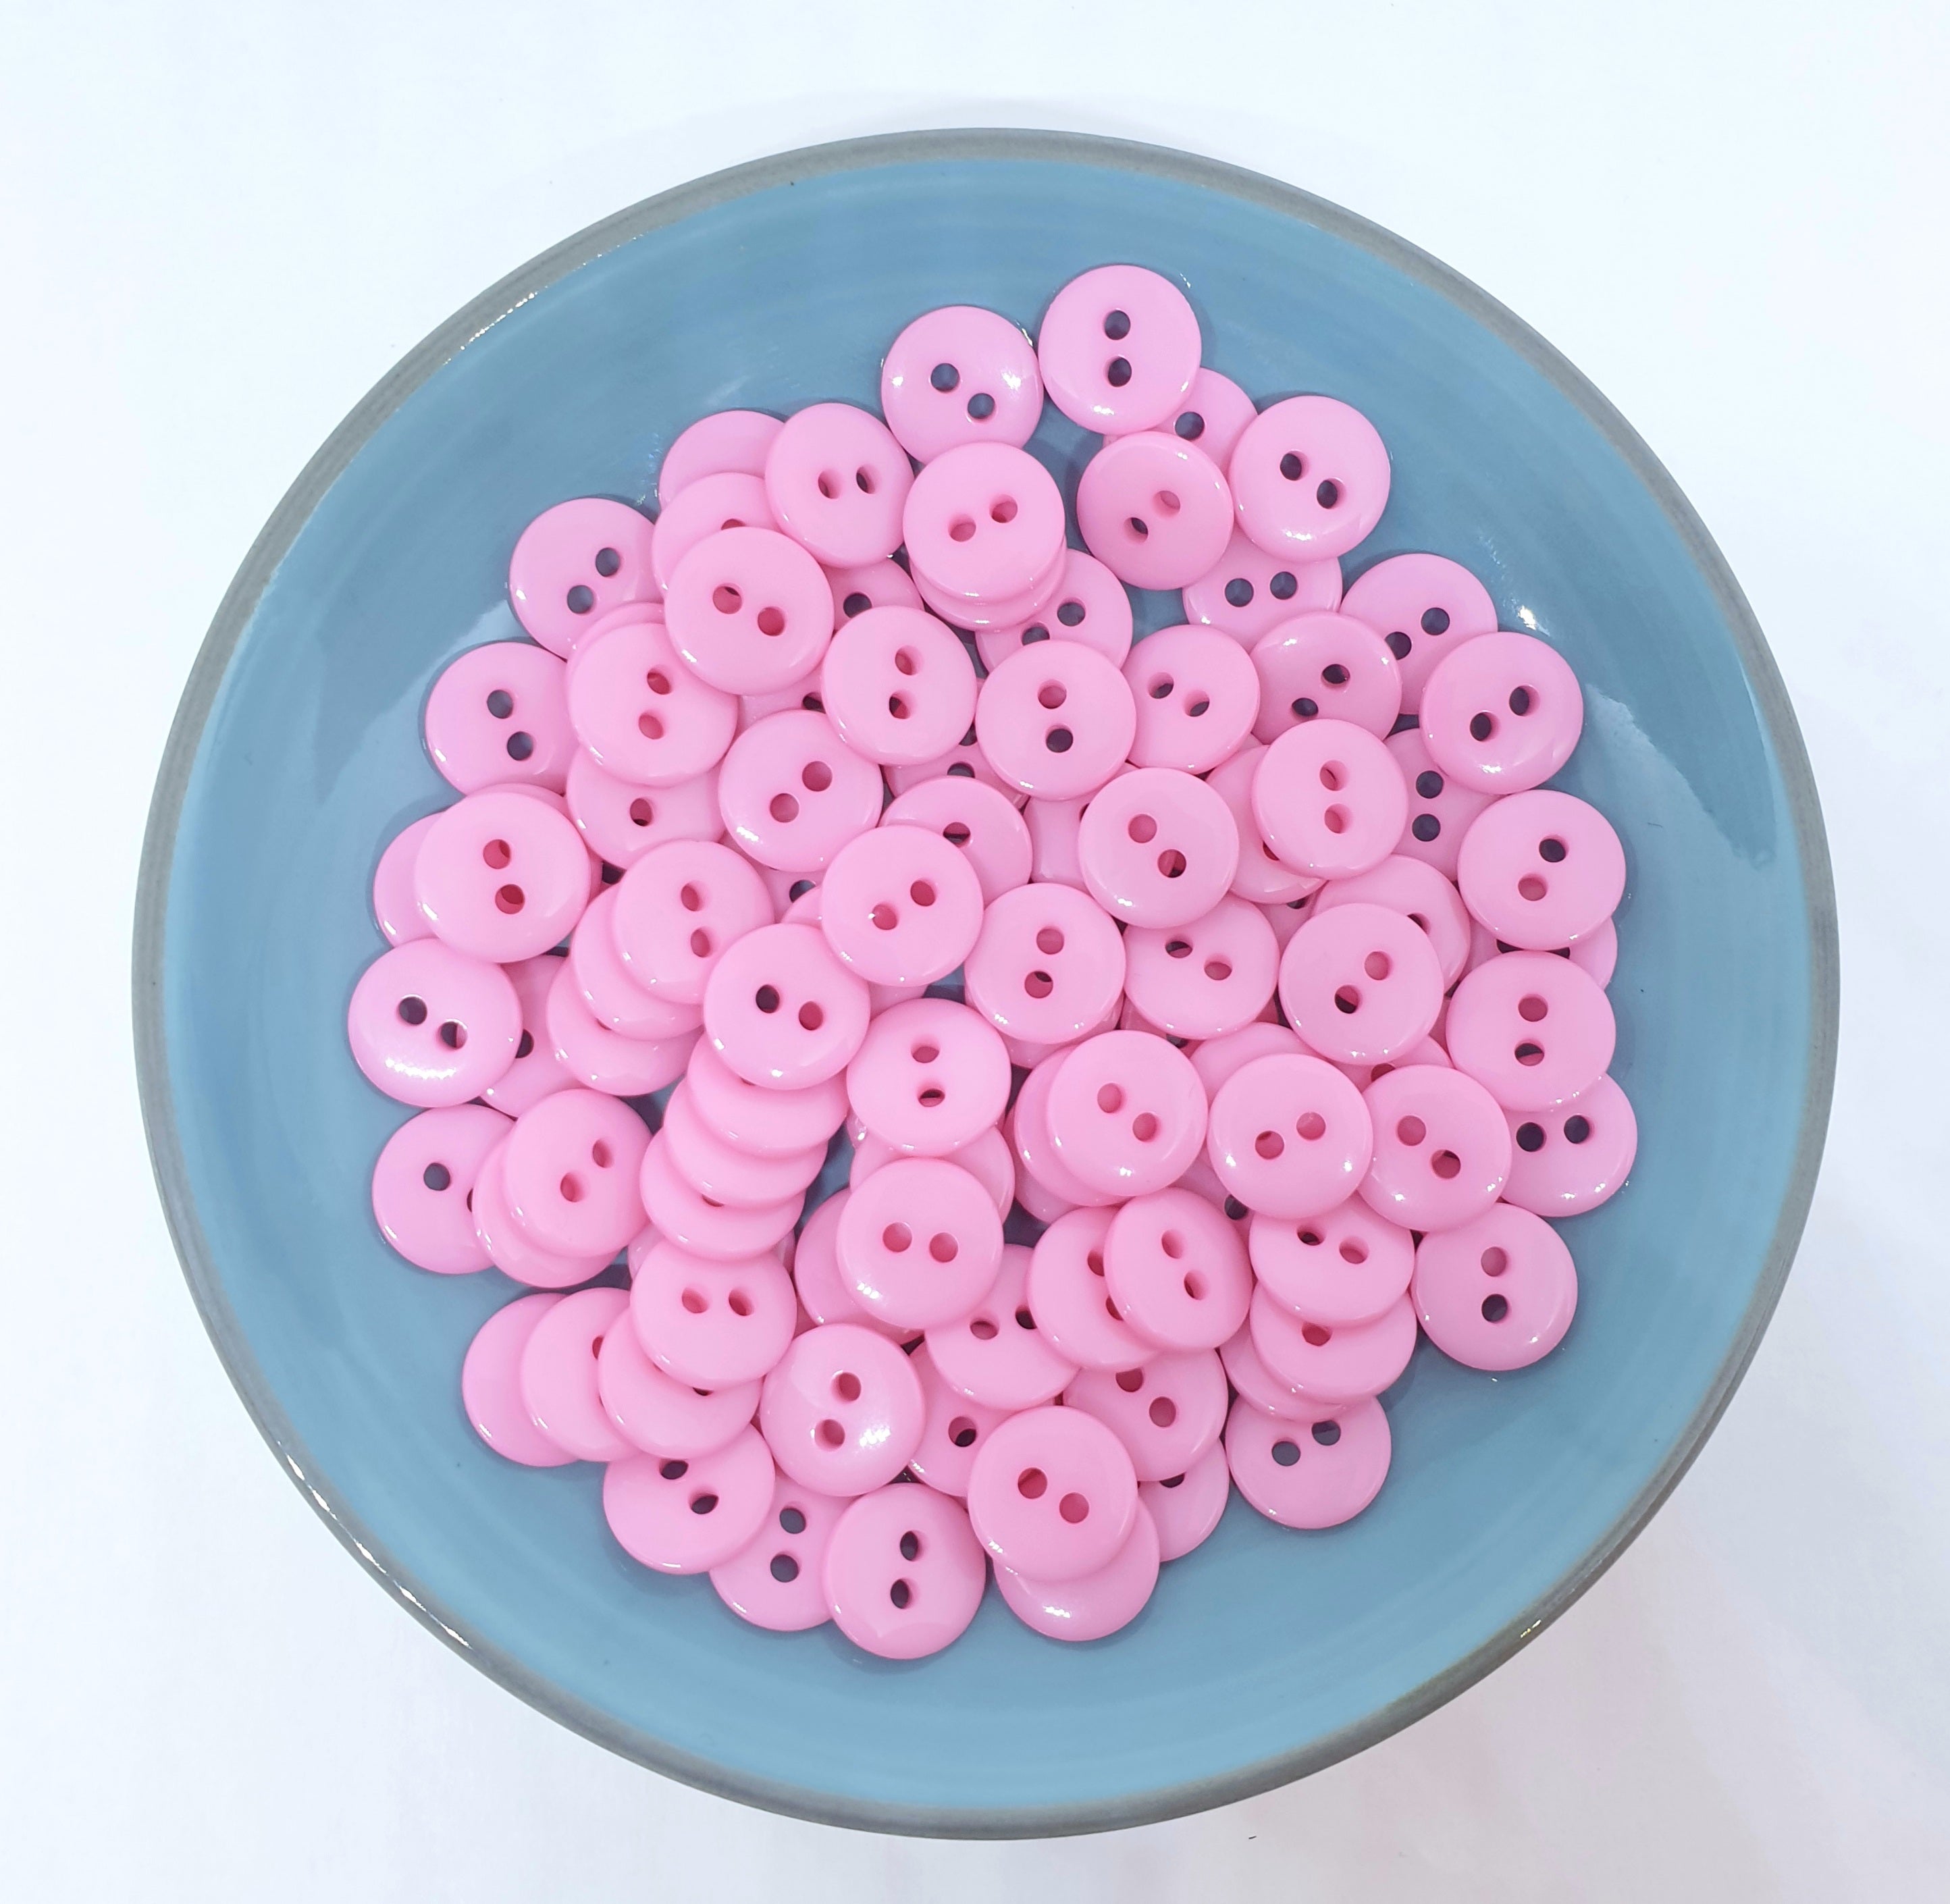 MajorCrafts 120pcs 10mm Rose Pink 2 Holes Small Round Resin Sewing Buttons B04